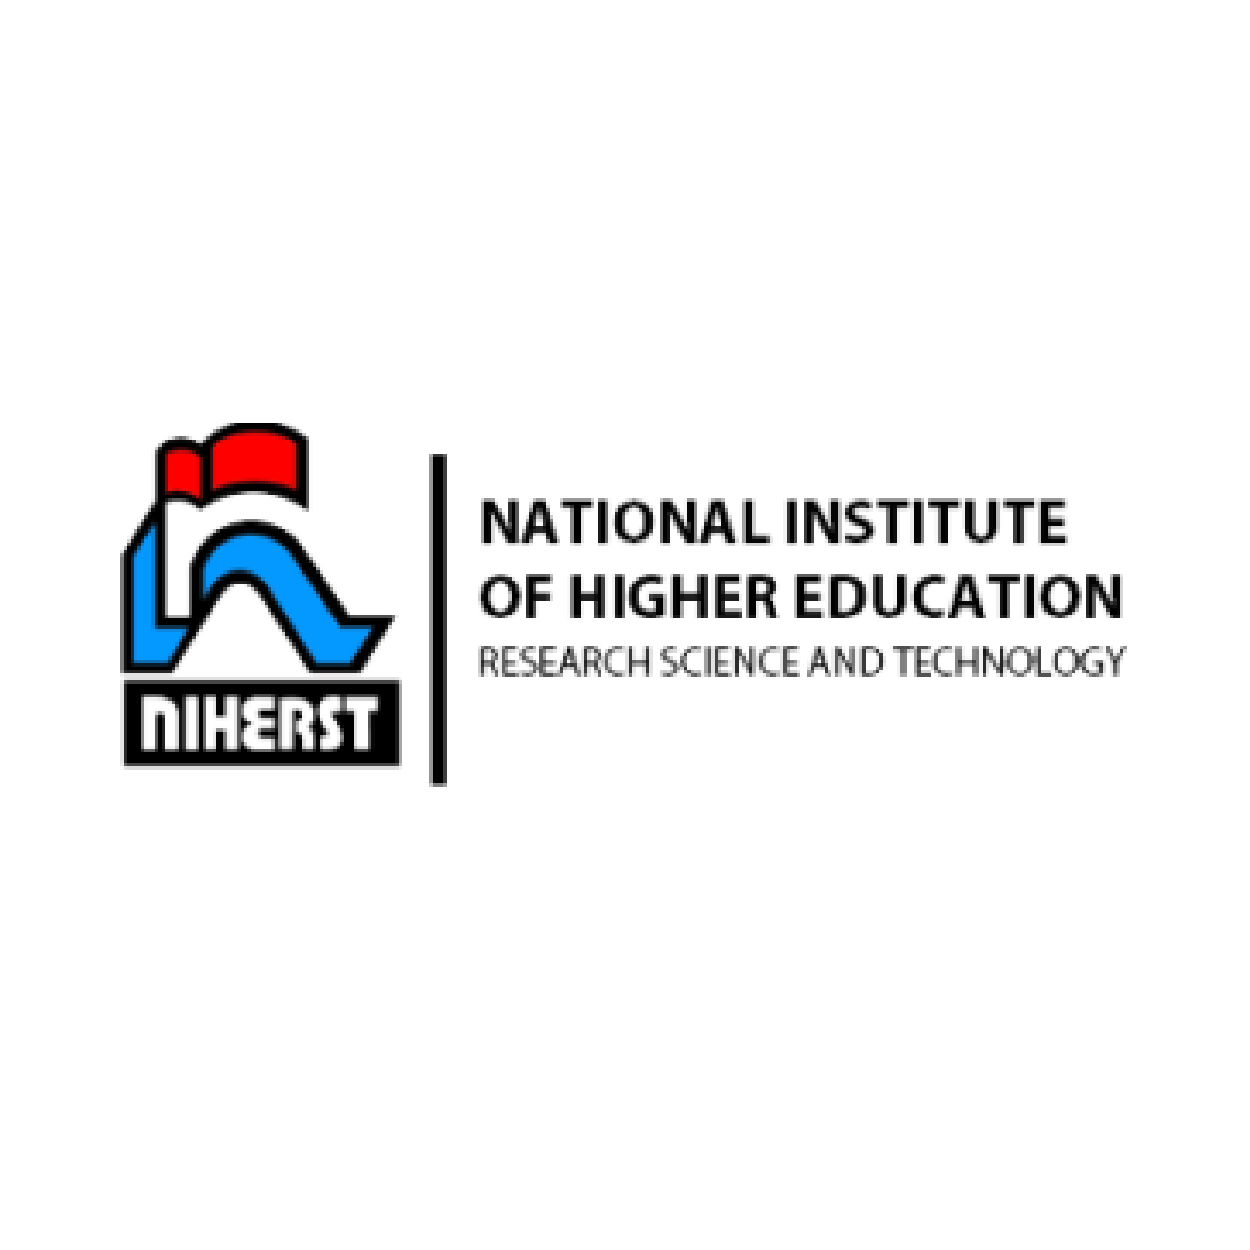 National Institute of Higher Education Research Science and Technology